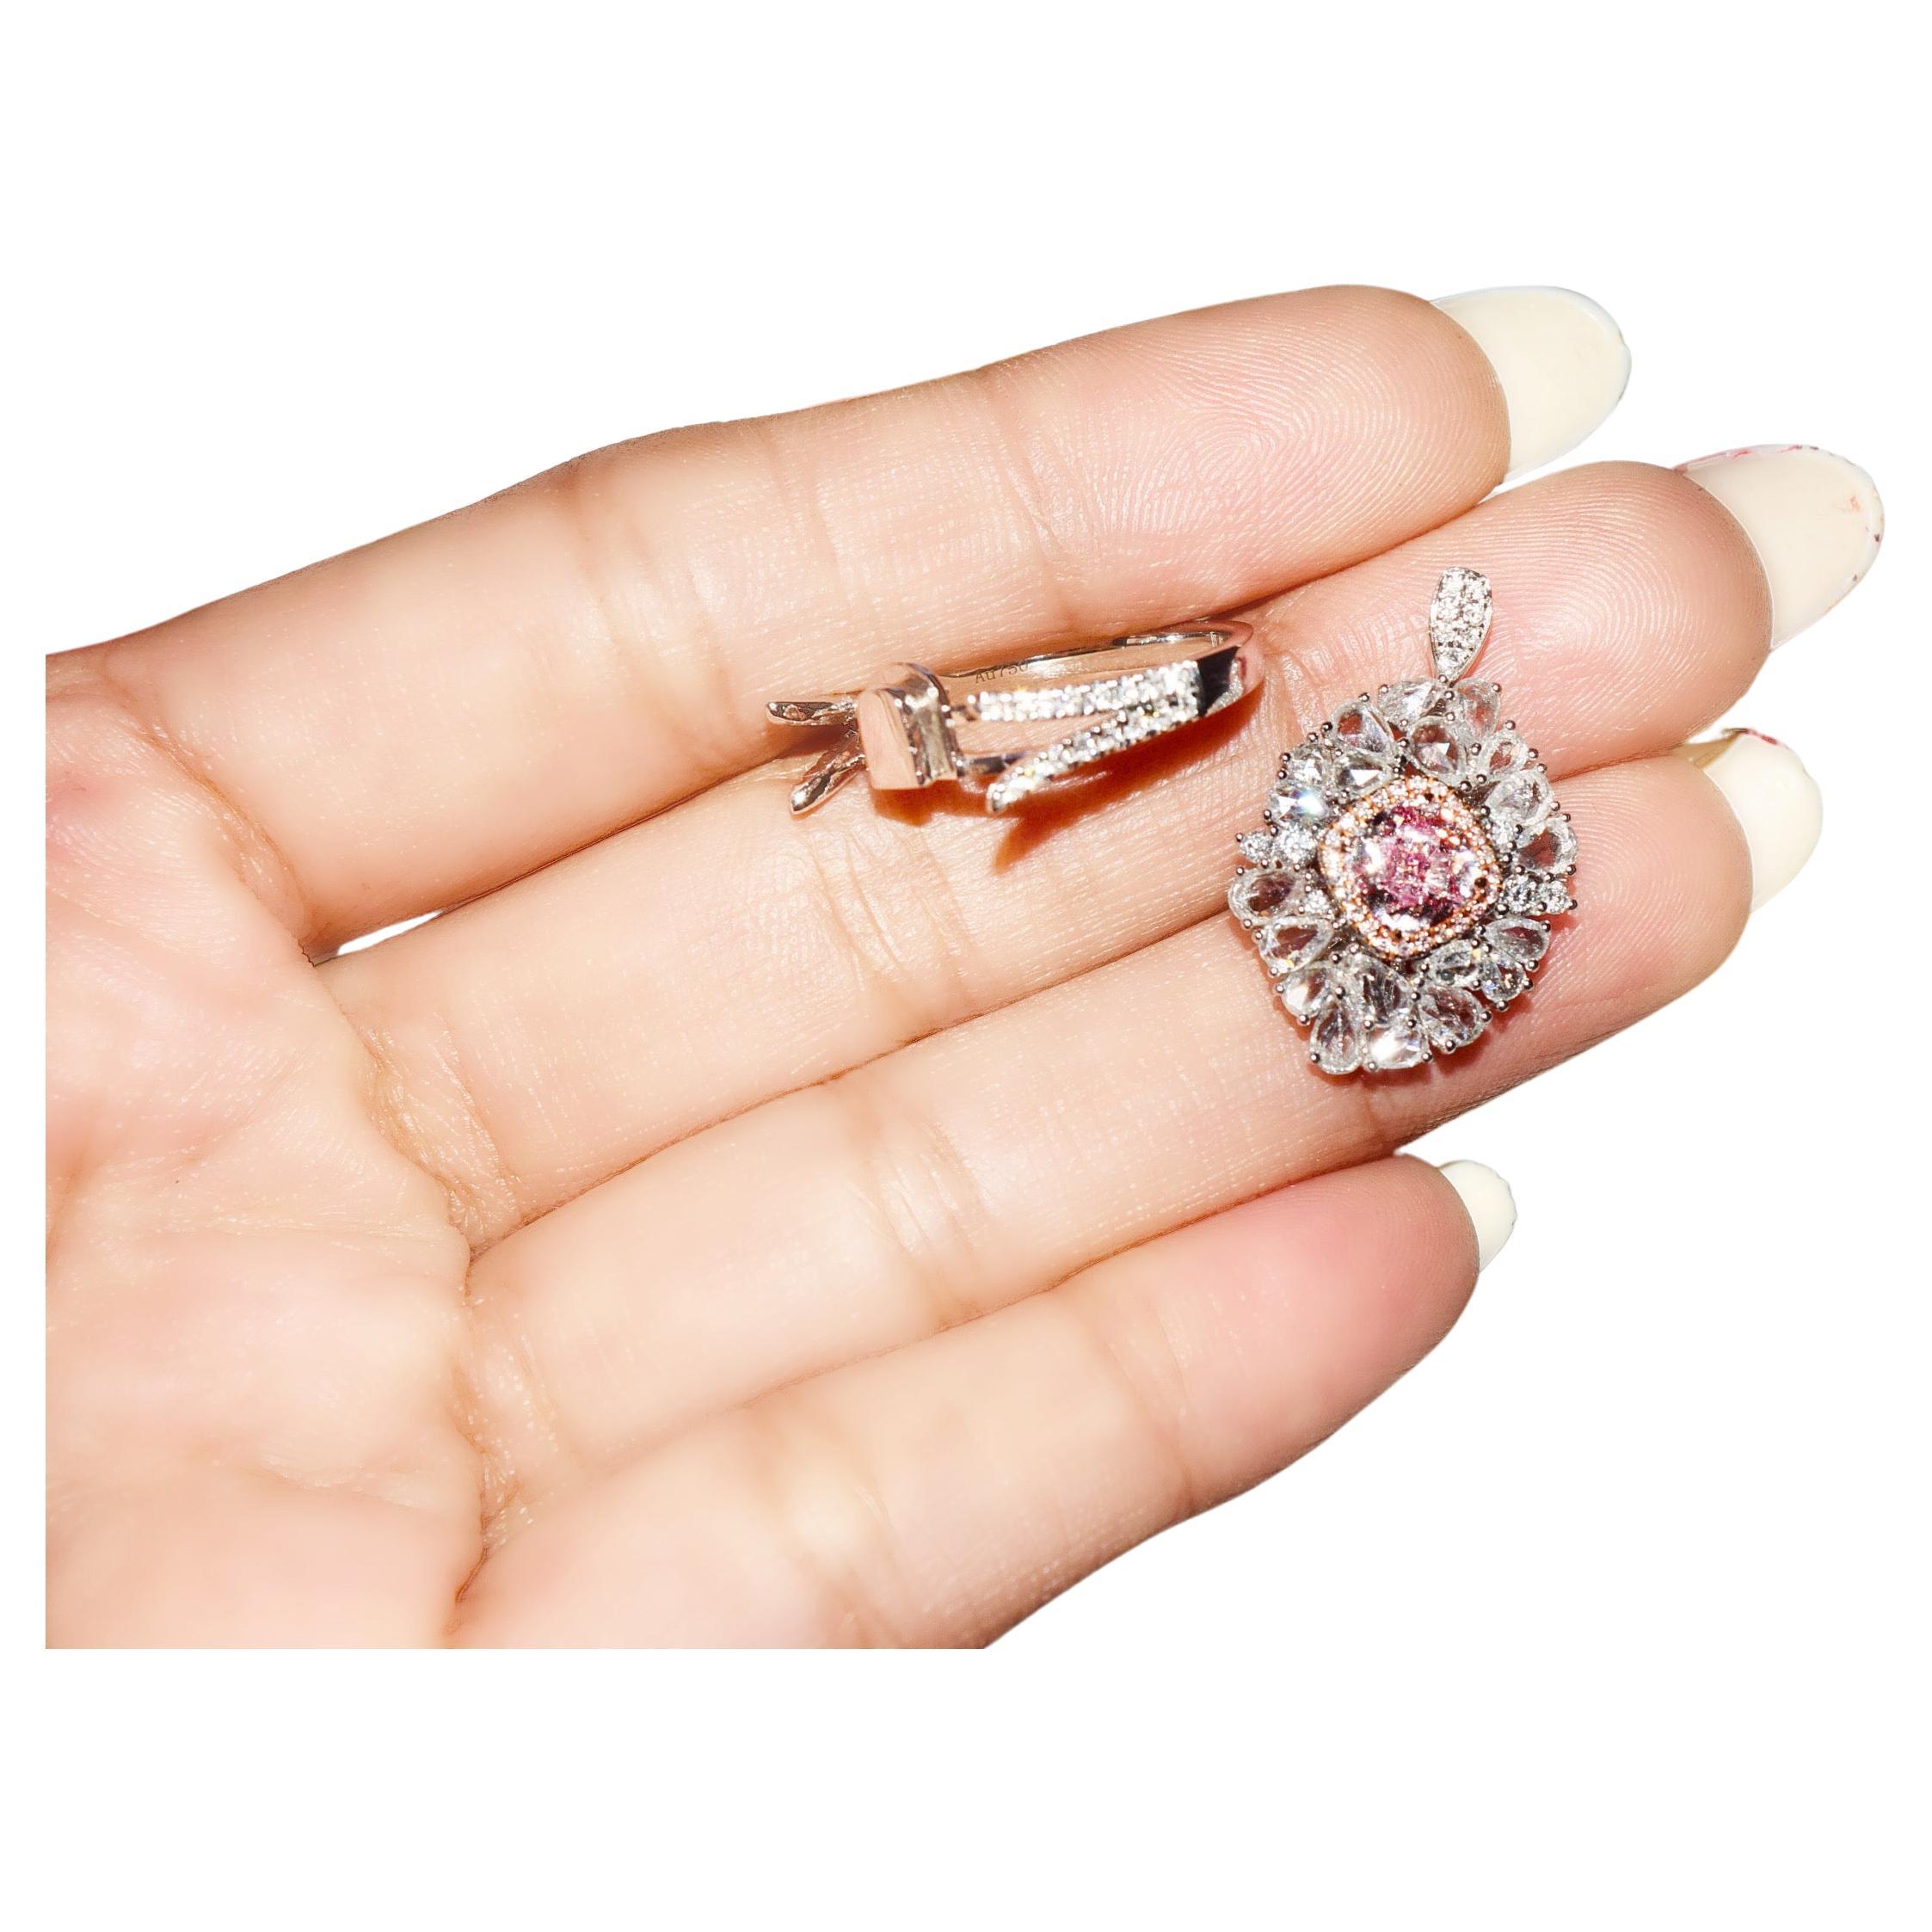 GIA Certified 1.01 Carat Light Pink Diamond Ring VS2 Clarity For Sale